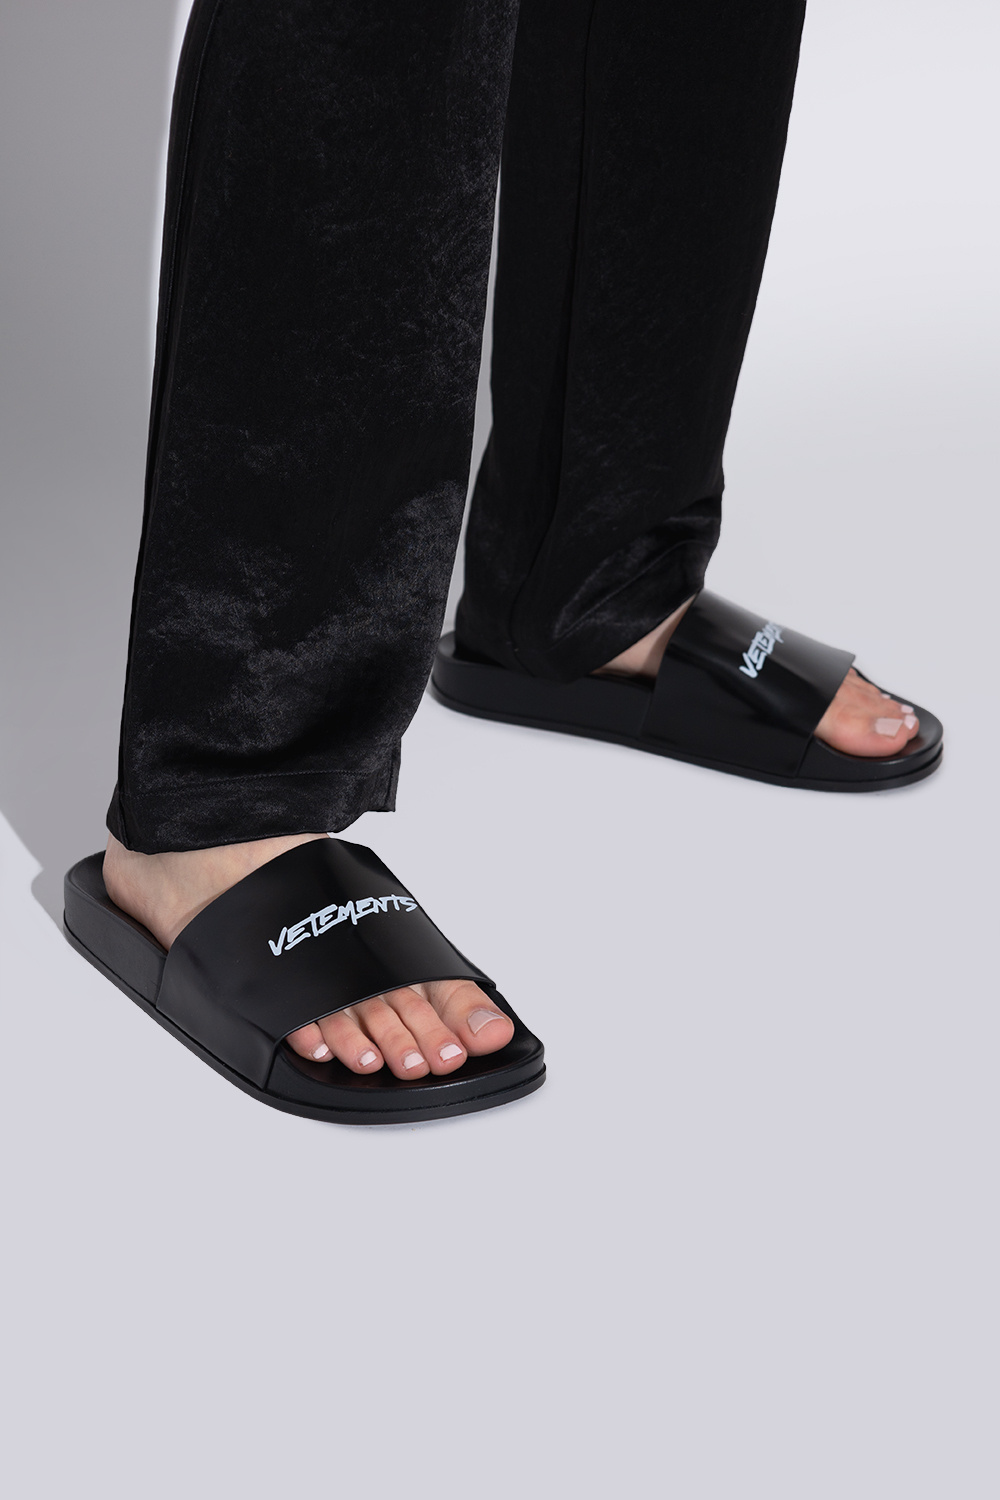 VETEMENTS Leather slides with logo | Women's Shoes | Vitkac